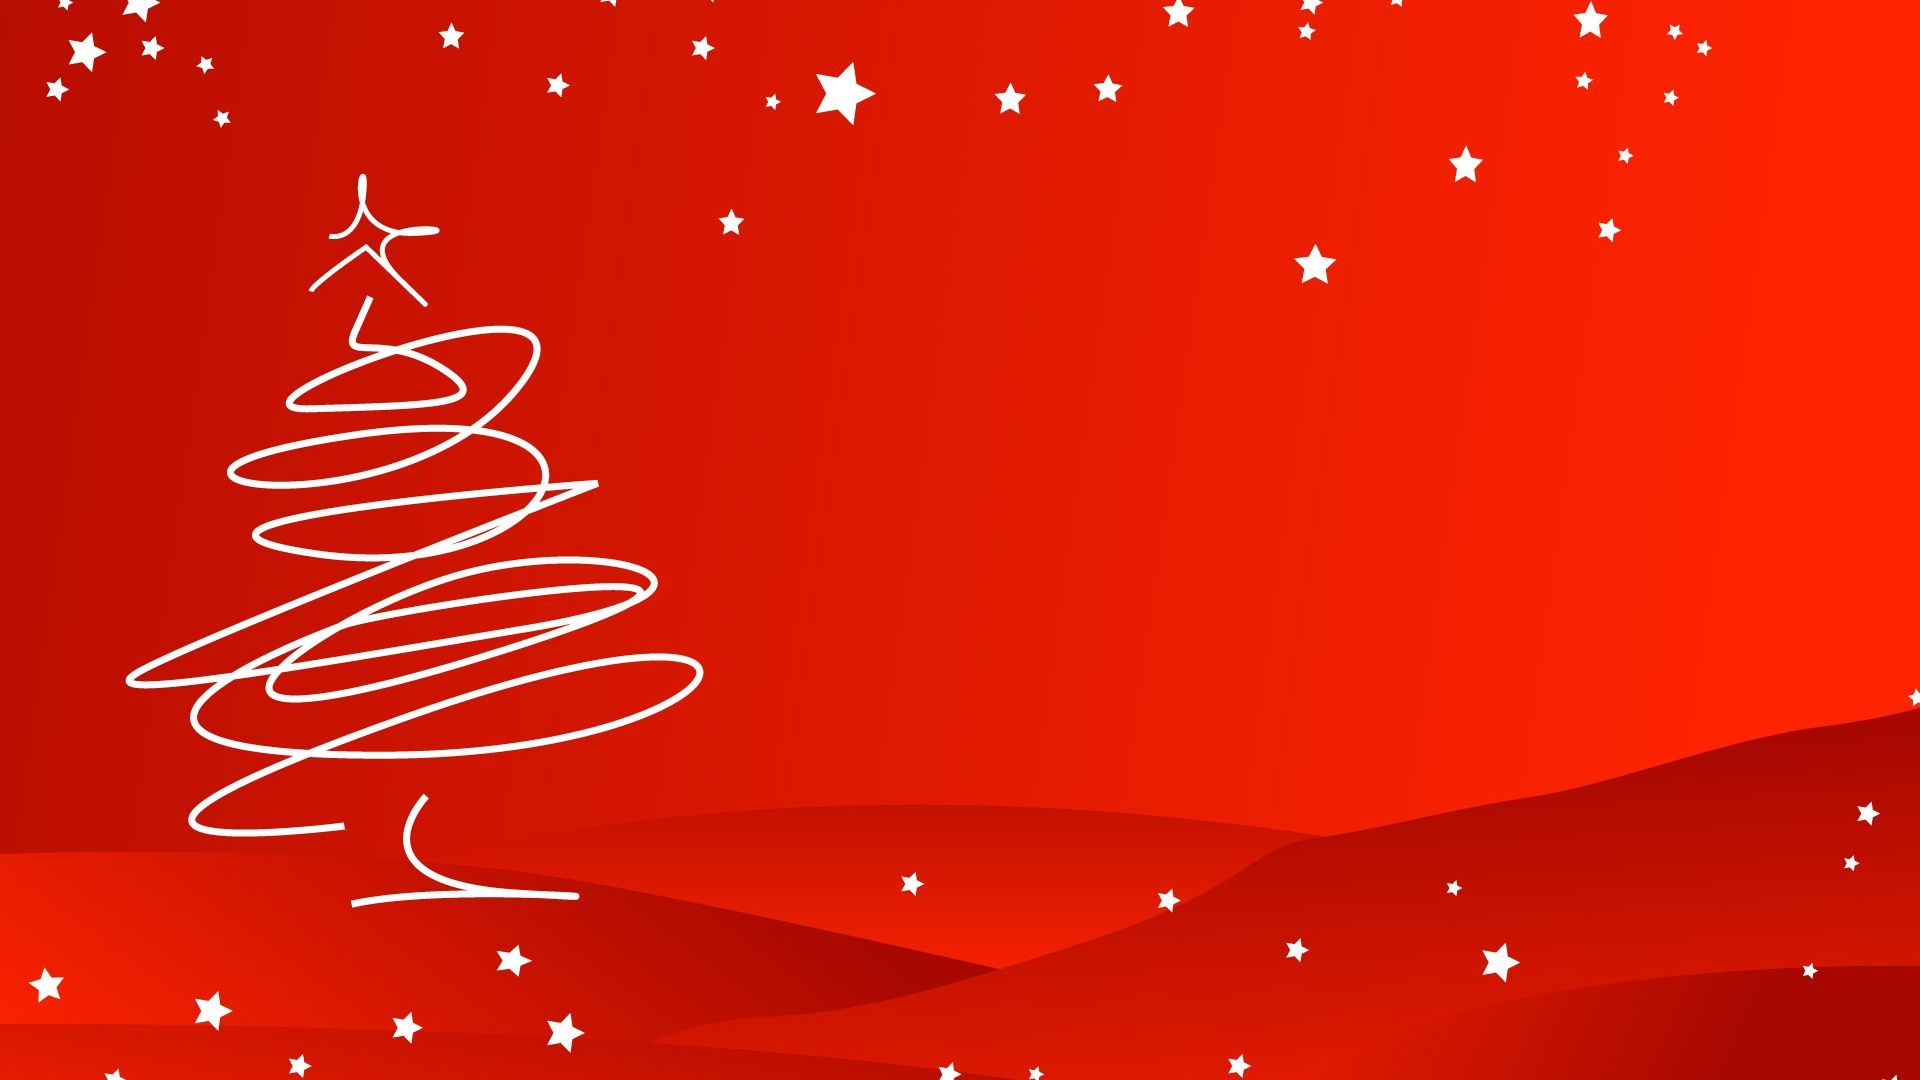 Christmas Wallpaper 107 wallpapers55.com - Best Wallpapers for